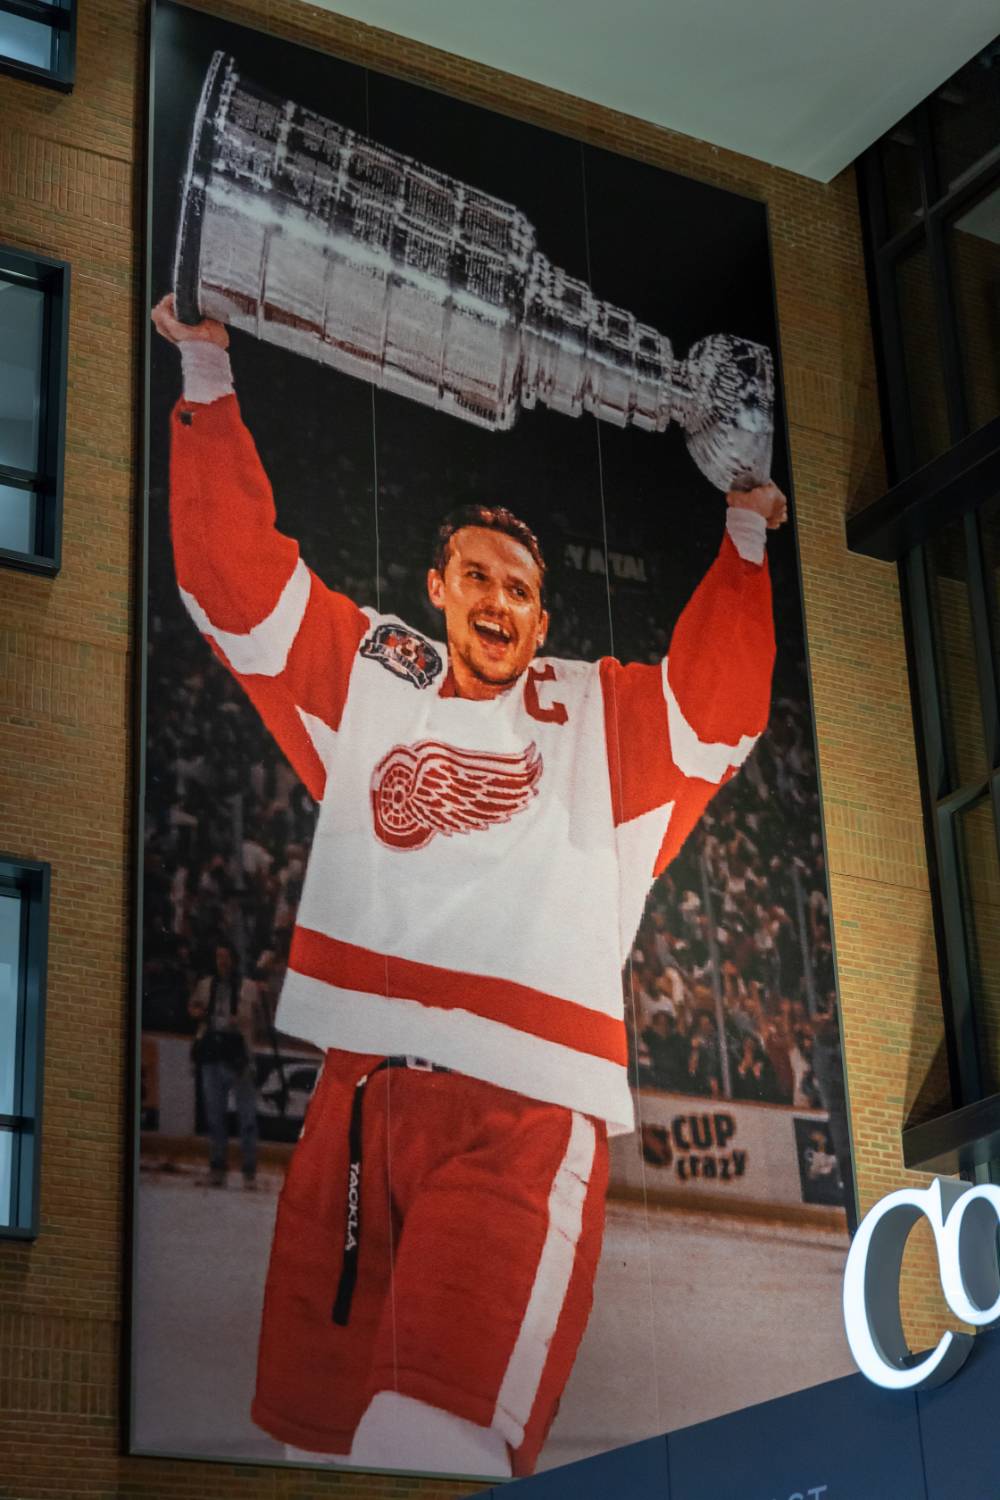 Poster of a hockey player.